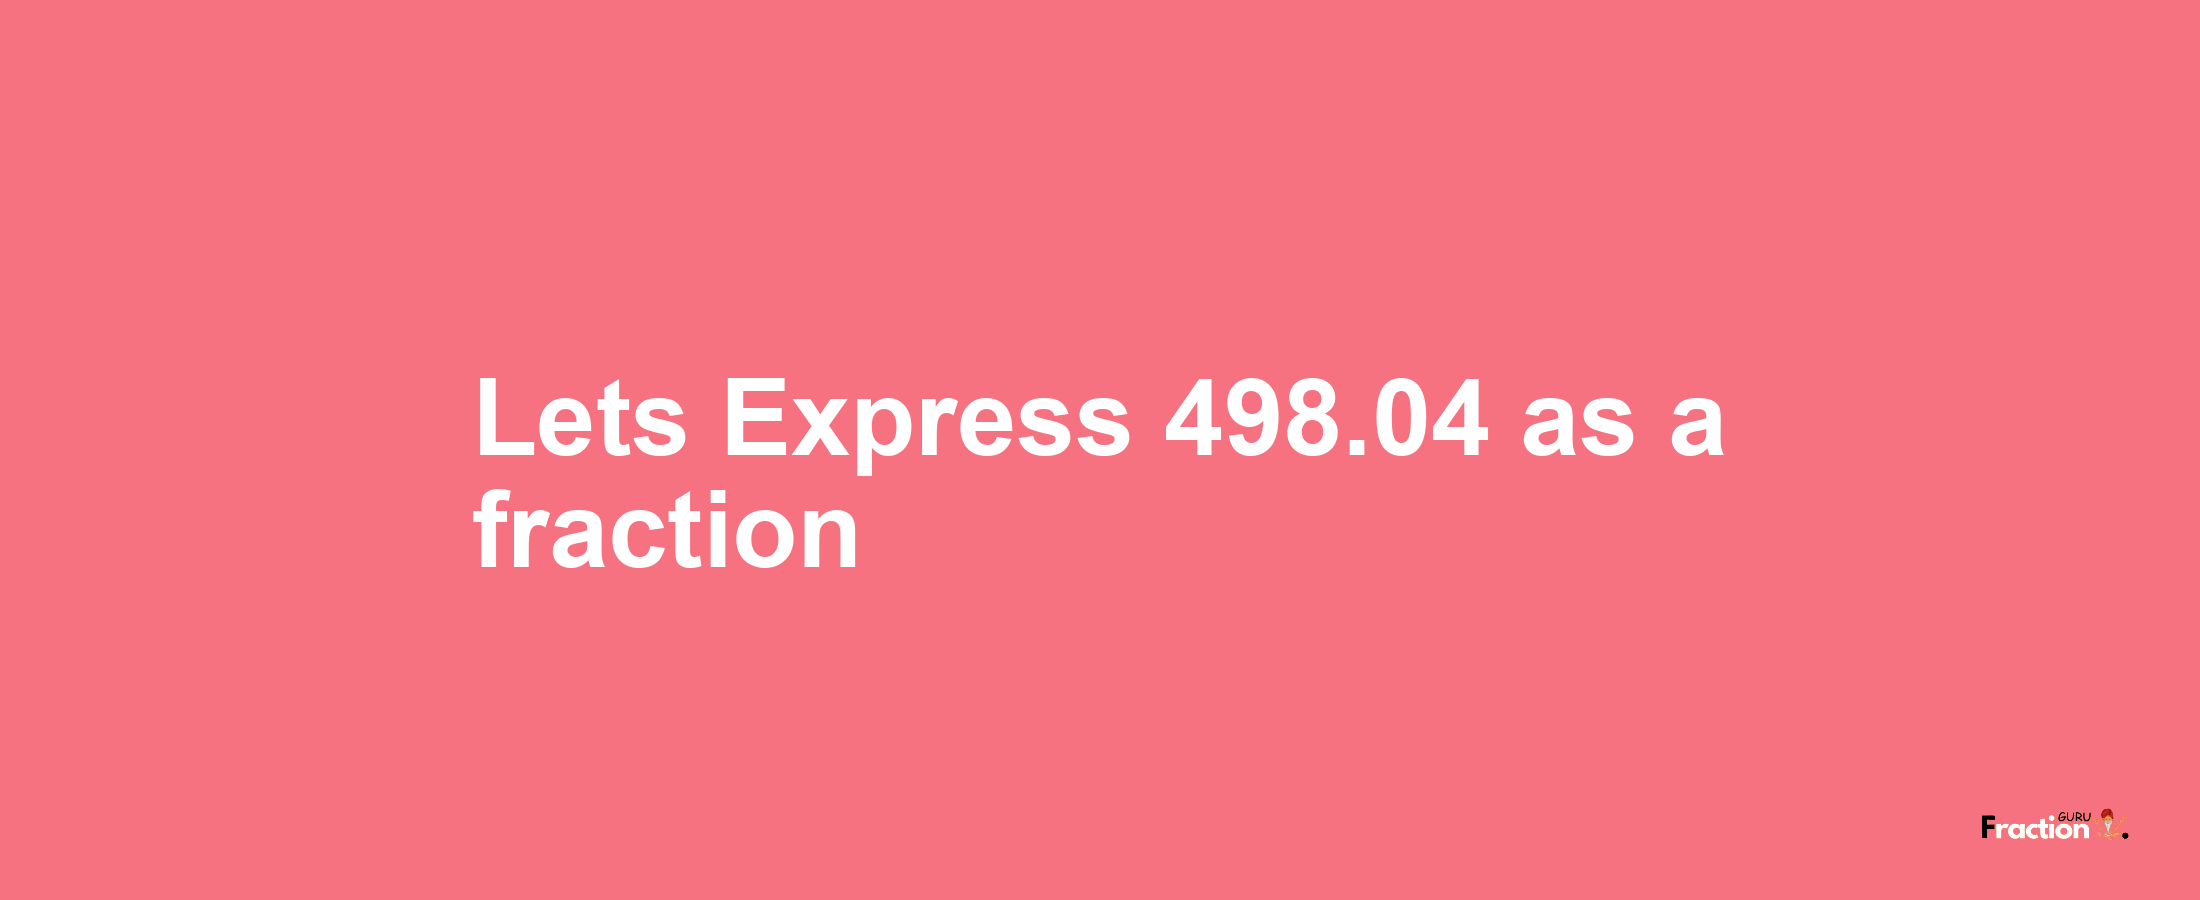 Lets Express 498.04 as afraction